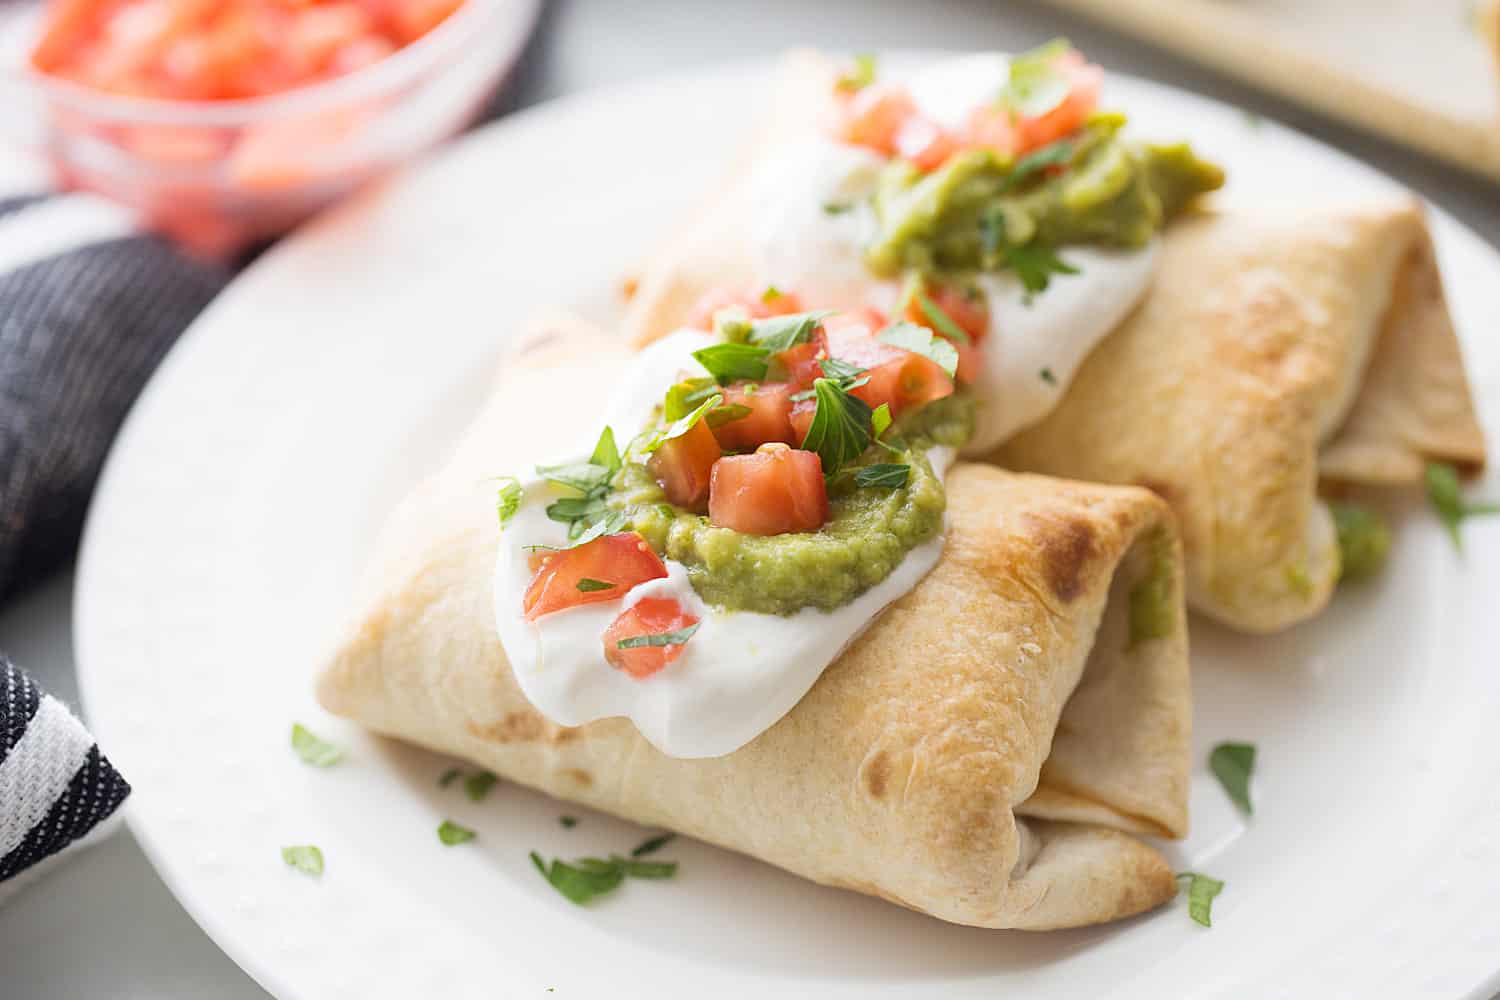 Baked Chicken Chimichangas - Baked chicken chimichangas make for a fun, flavorful alternative to tacos for Taco Tuesday. They're also a super tasty freezer meal!